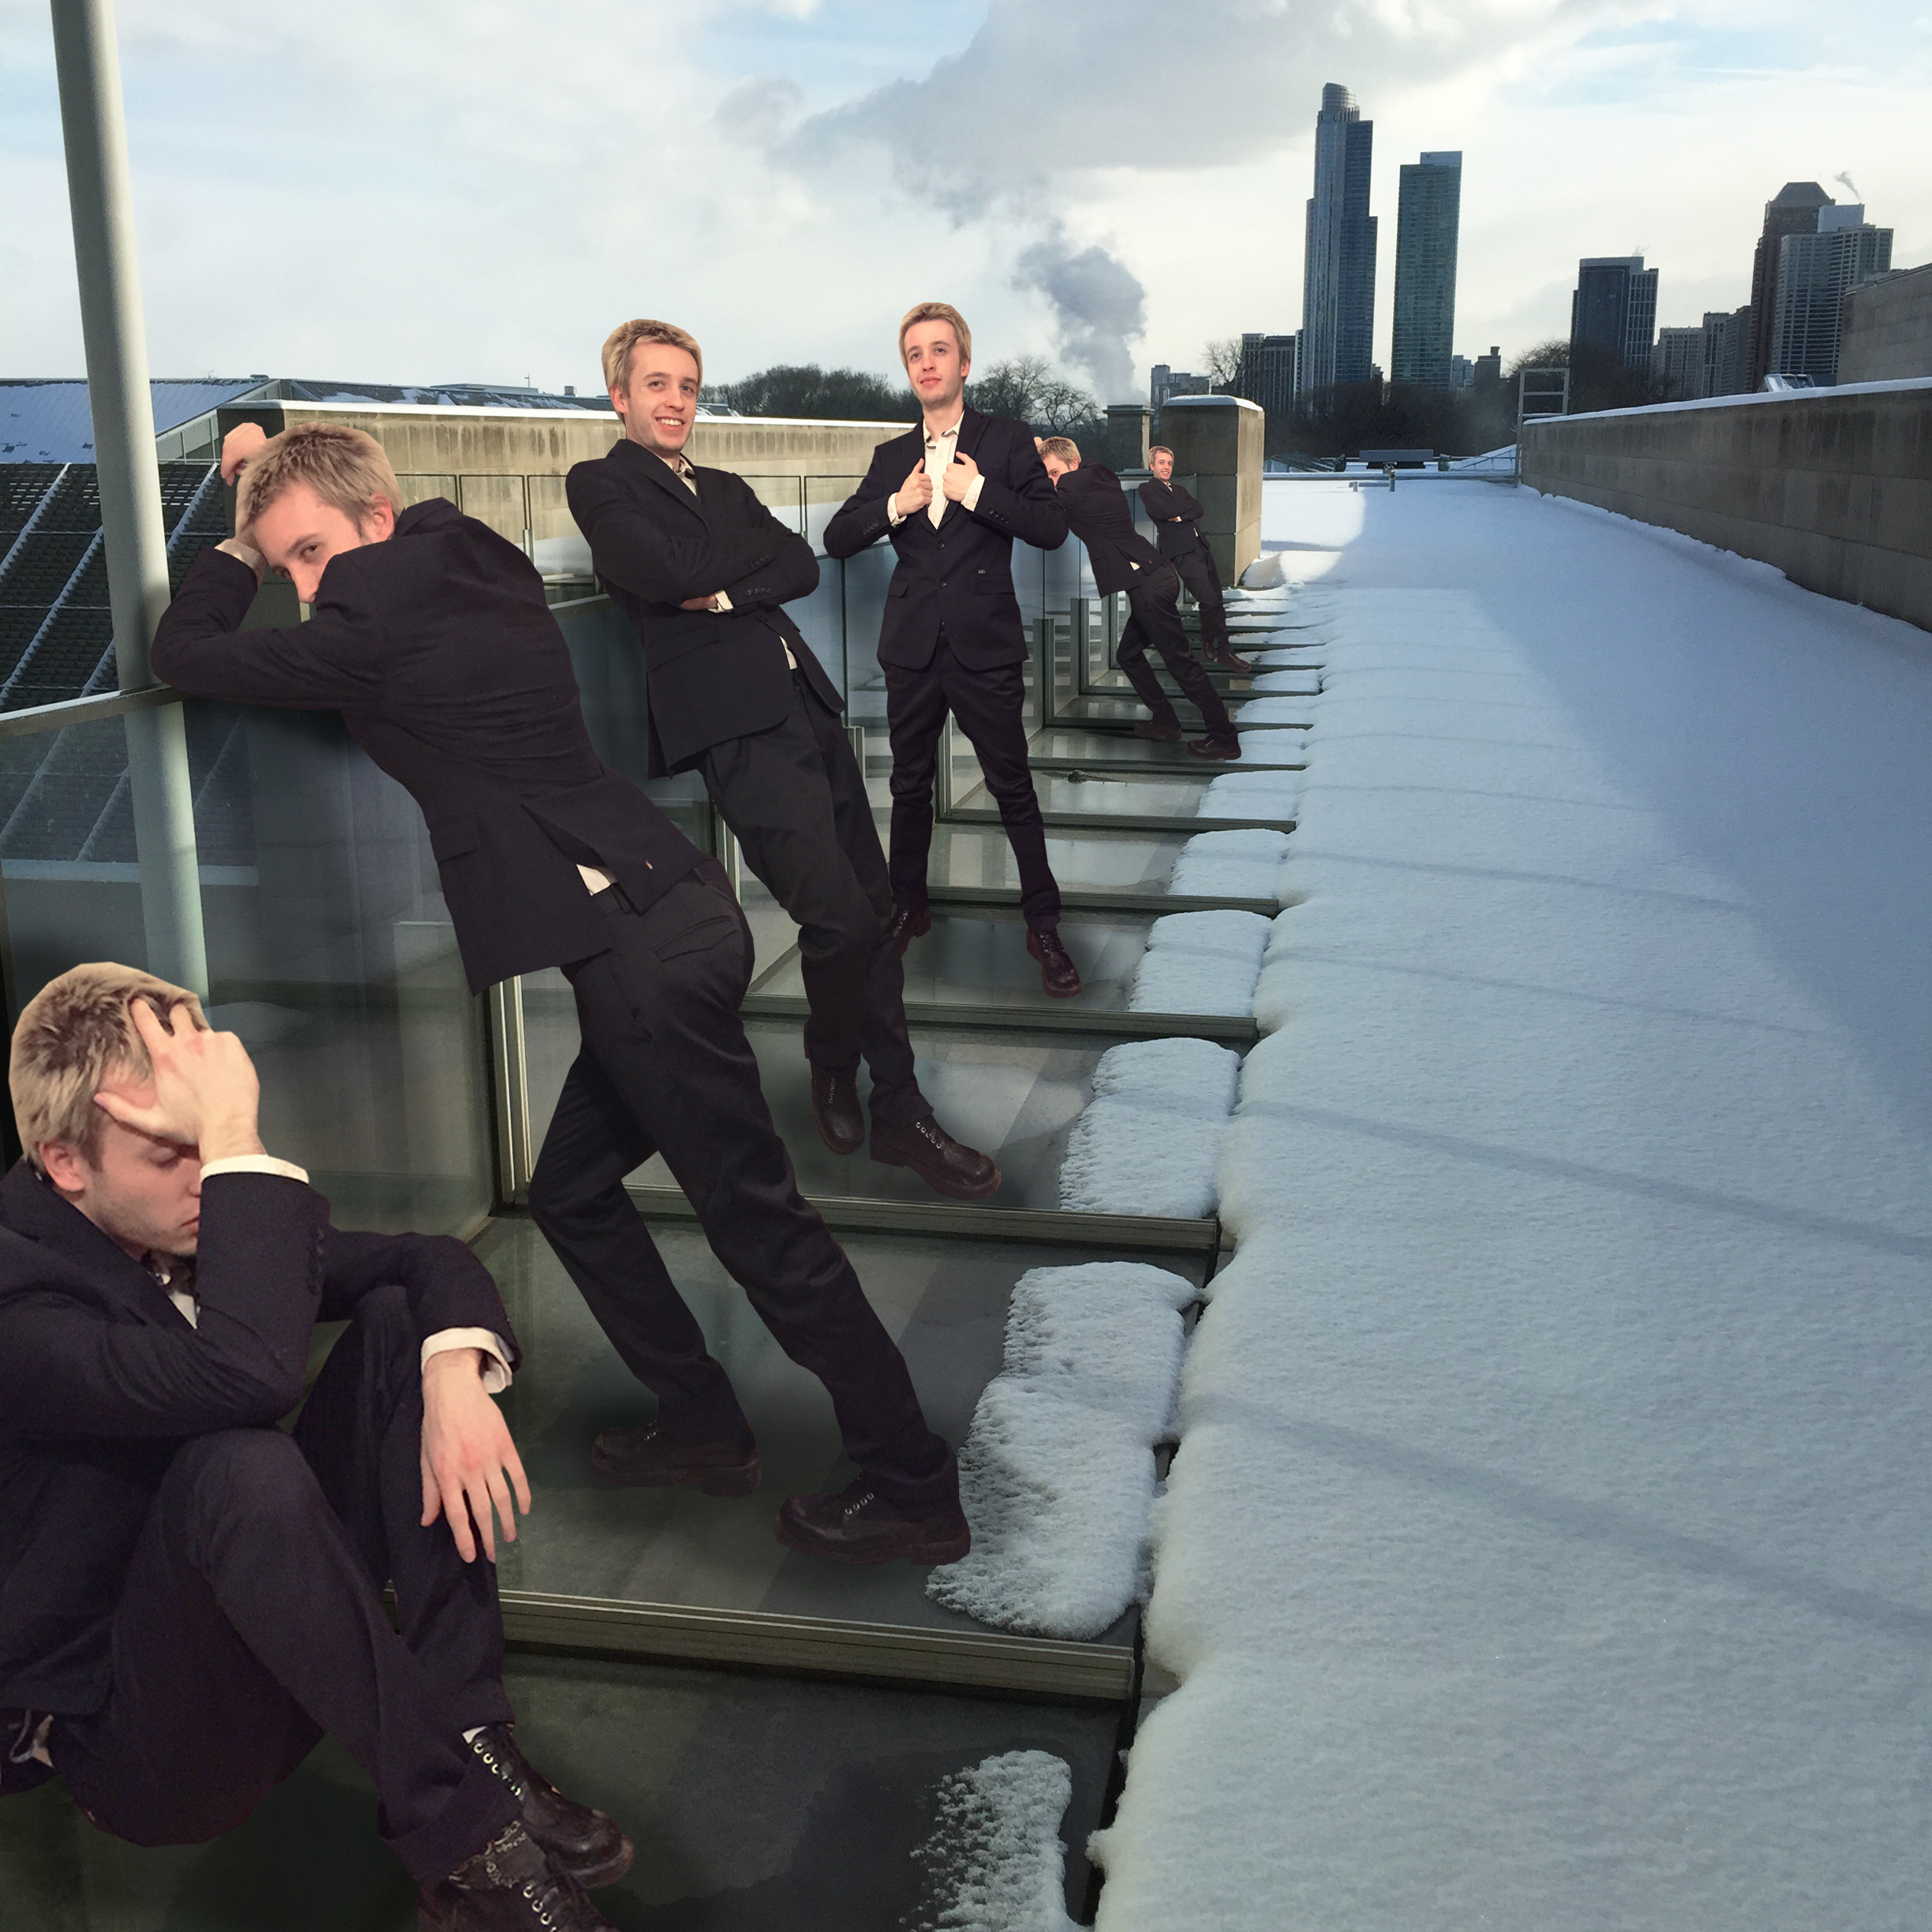 Five butlers on a rooftop covered in snow